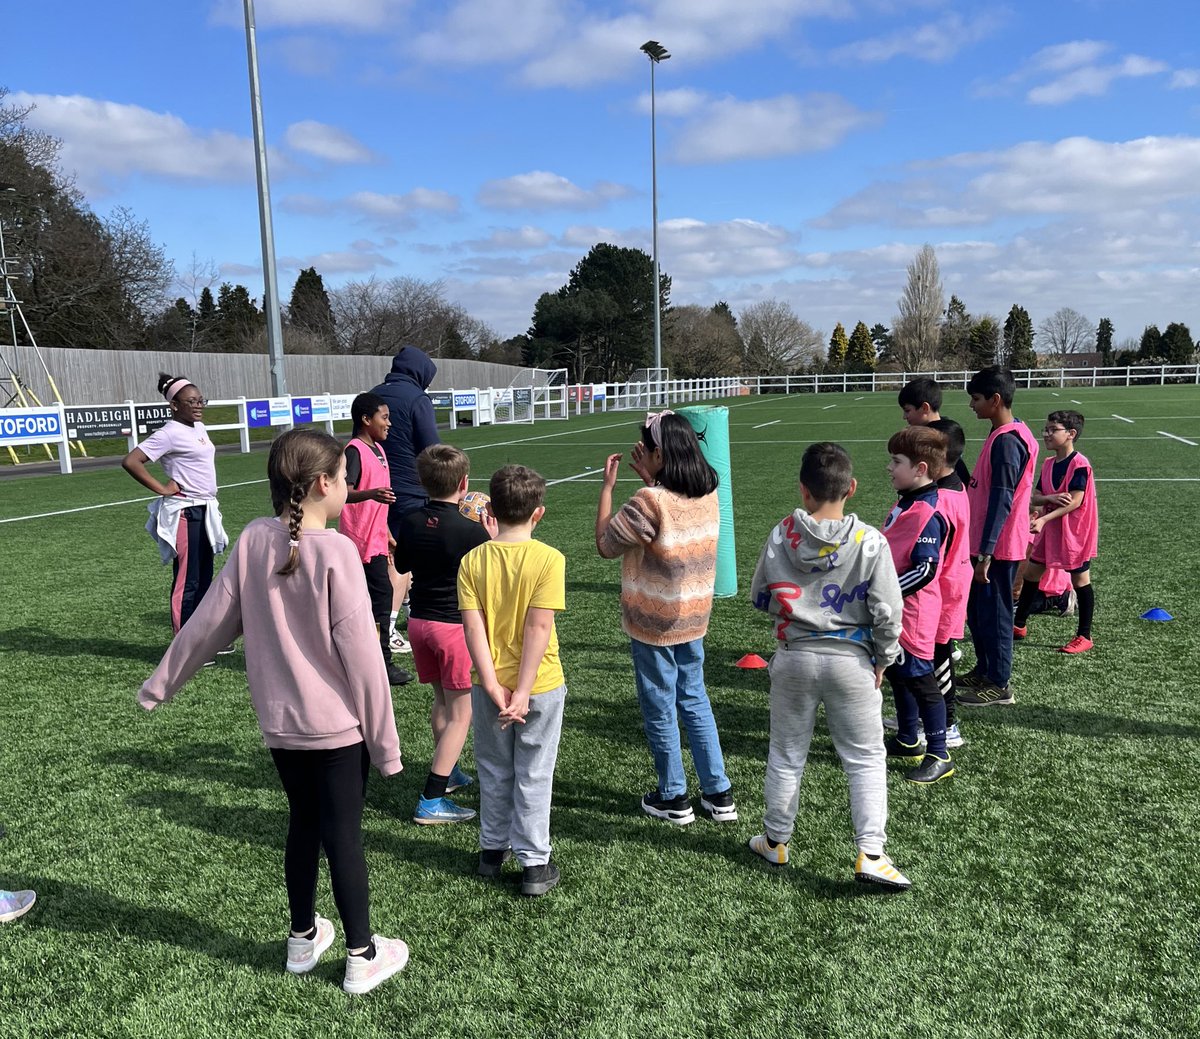 Thank you to all those who attended our HAF Camp this week! You brought the sunshine ☀️ too.

🔌 Powered by @CommunityGroup5 

@bringitonbrum @StreetGamesMids